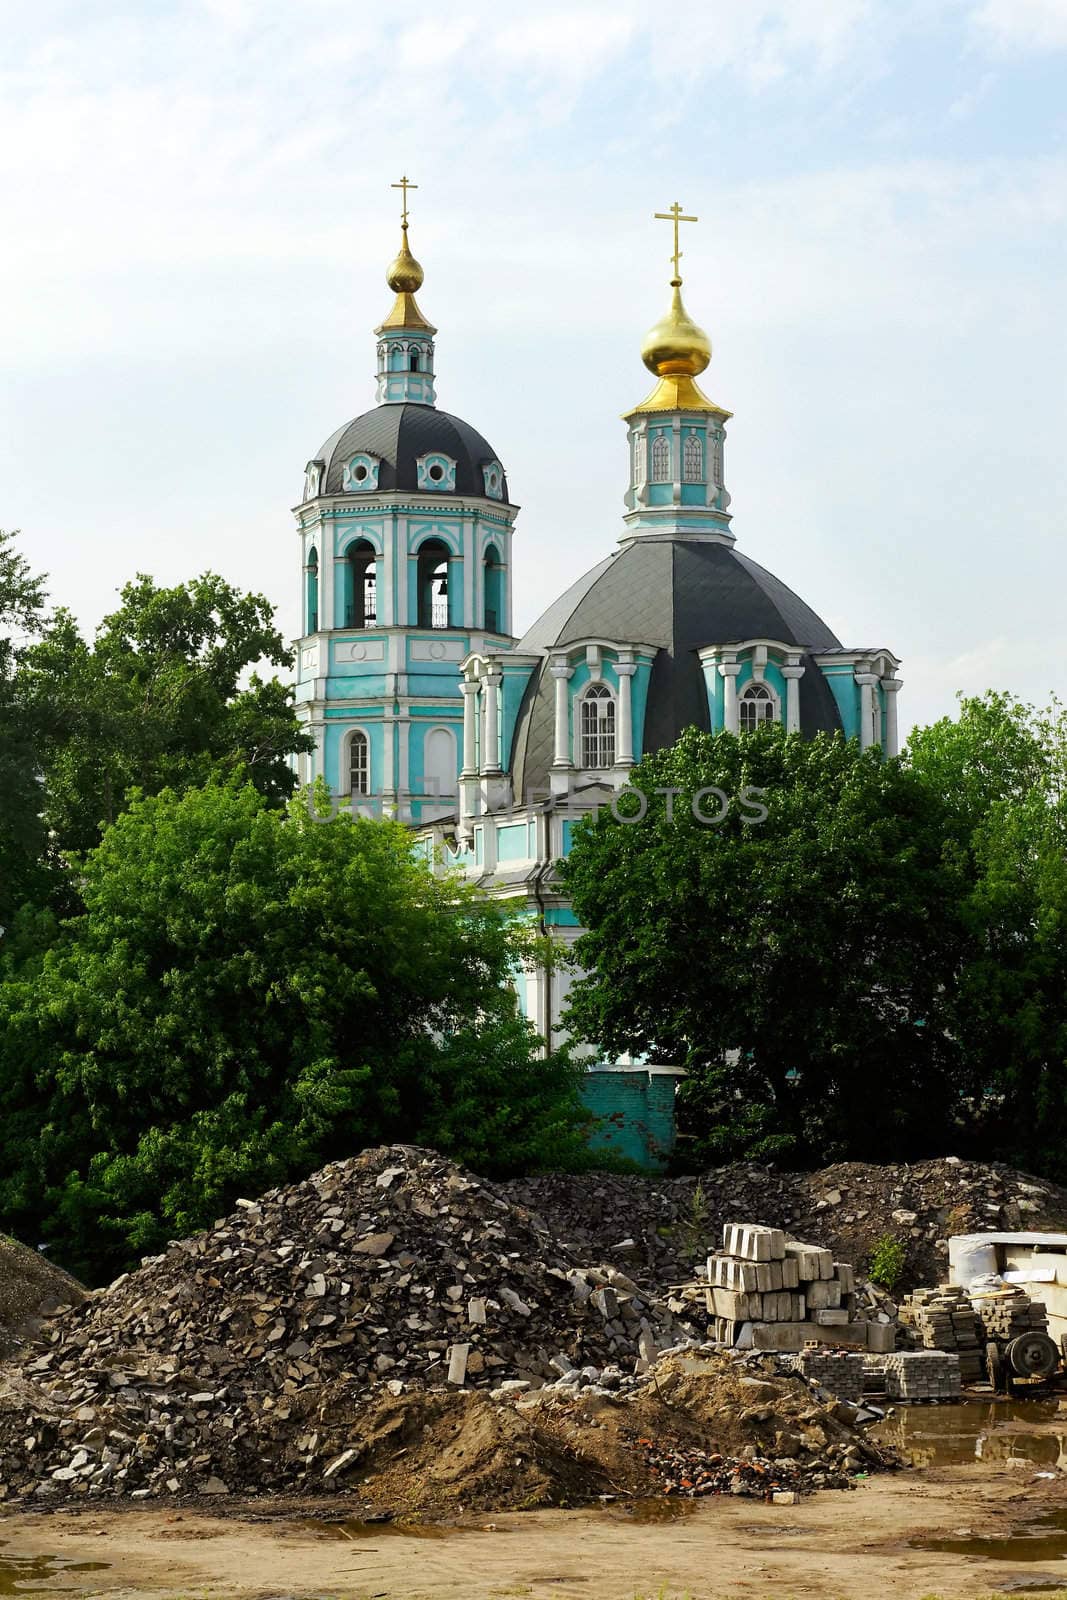 a photo of an Orthodox Church with green walls and golden domes stand behind the trees